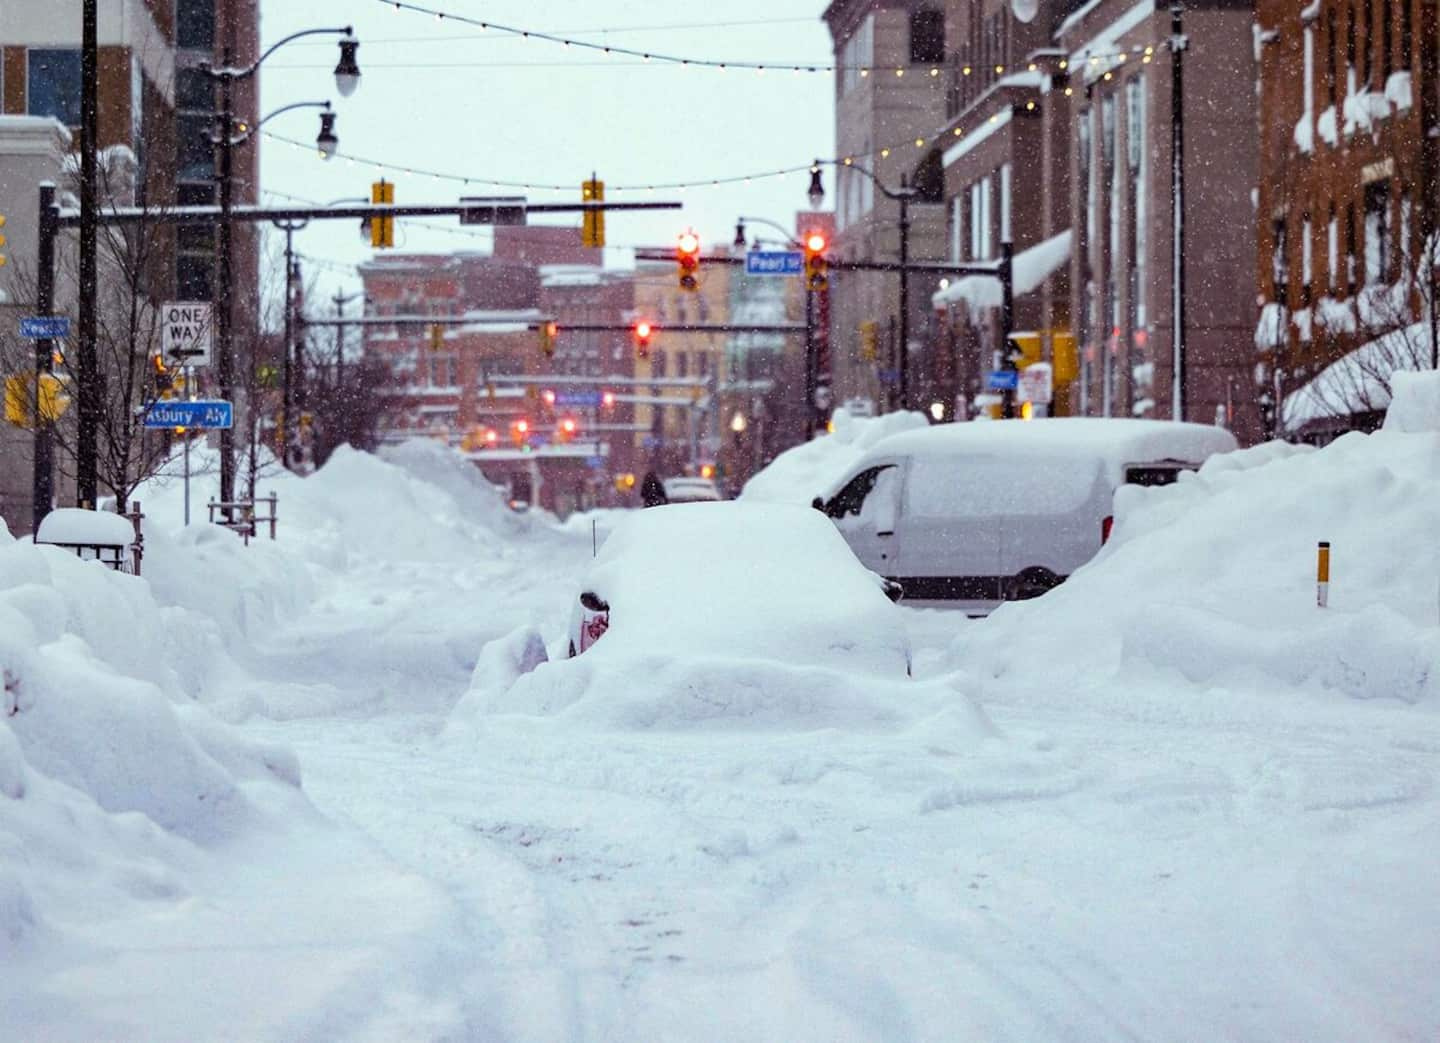 “The blizzard of the century” is not over yet, warns the governor of New York